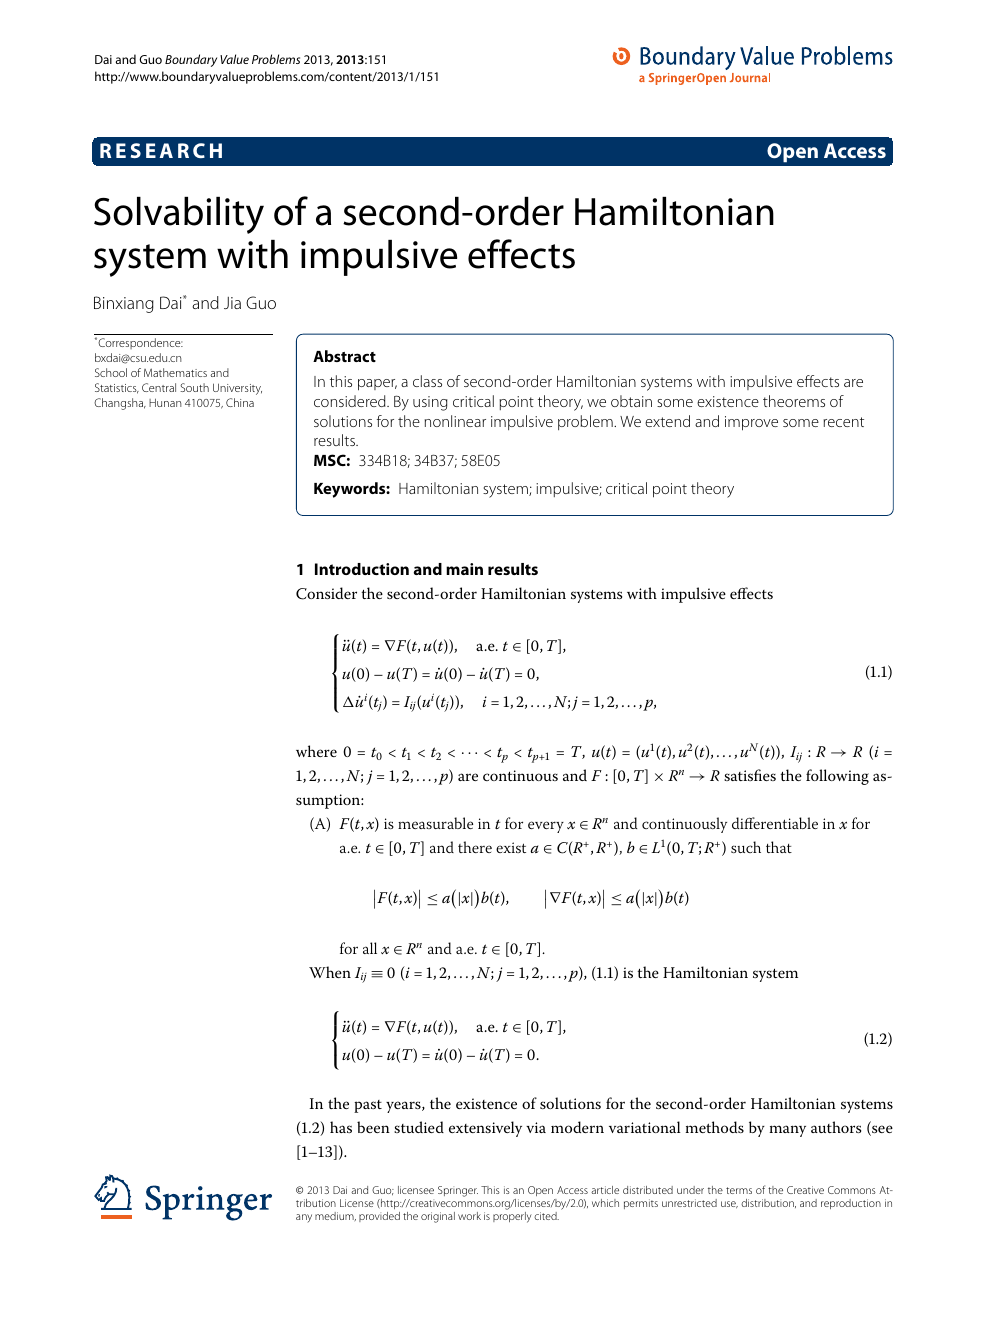 Solvability Of A Second Order Hamiltonian System With Impulsive Effects Topic Of Research Paper In Mathematics Download Scholarly Article Pdf And Read For Free On Cyberleninka Open Science Hub